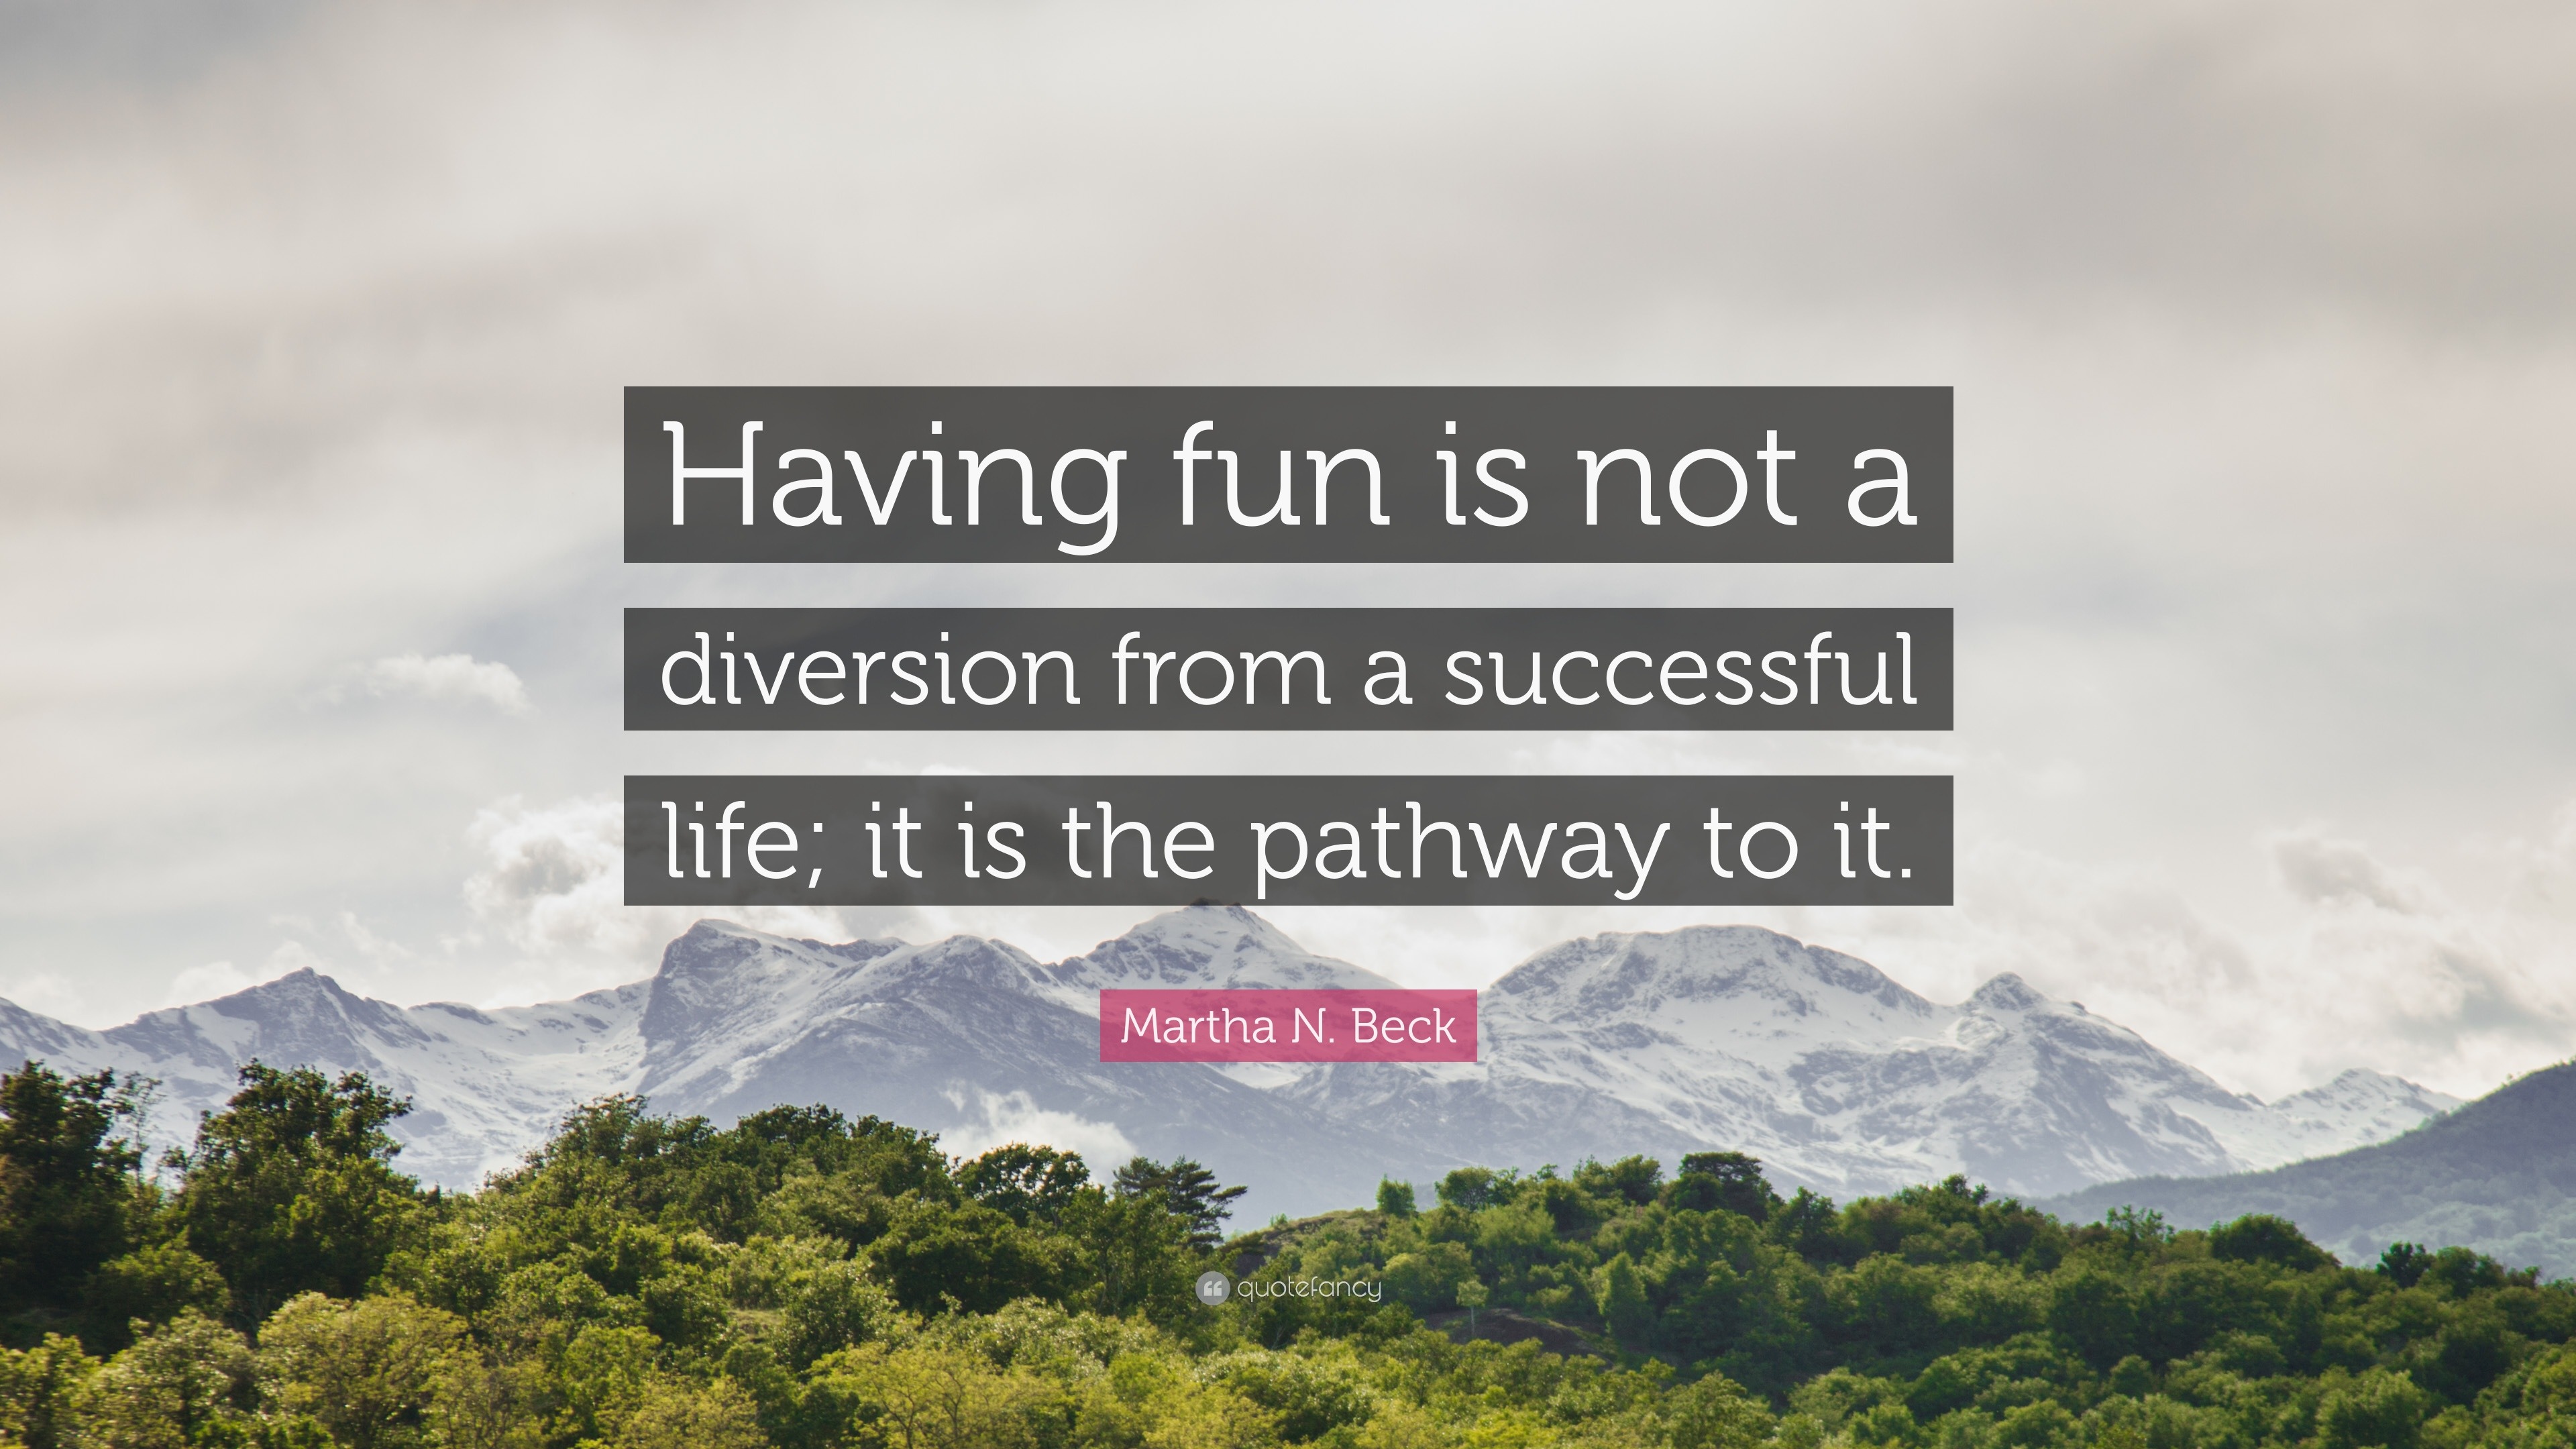 Quotes On Having Fun Martha N. Beck Quote: “Having fun is not a diversion from a successful  life; it is